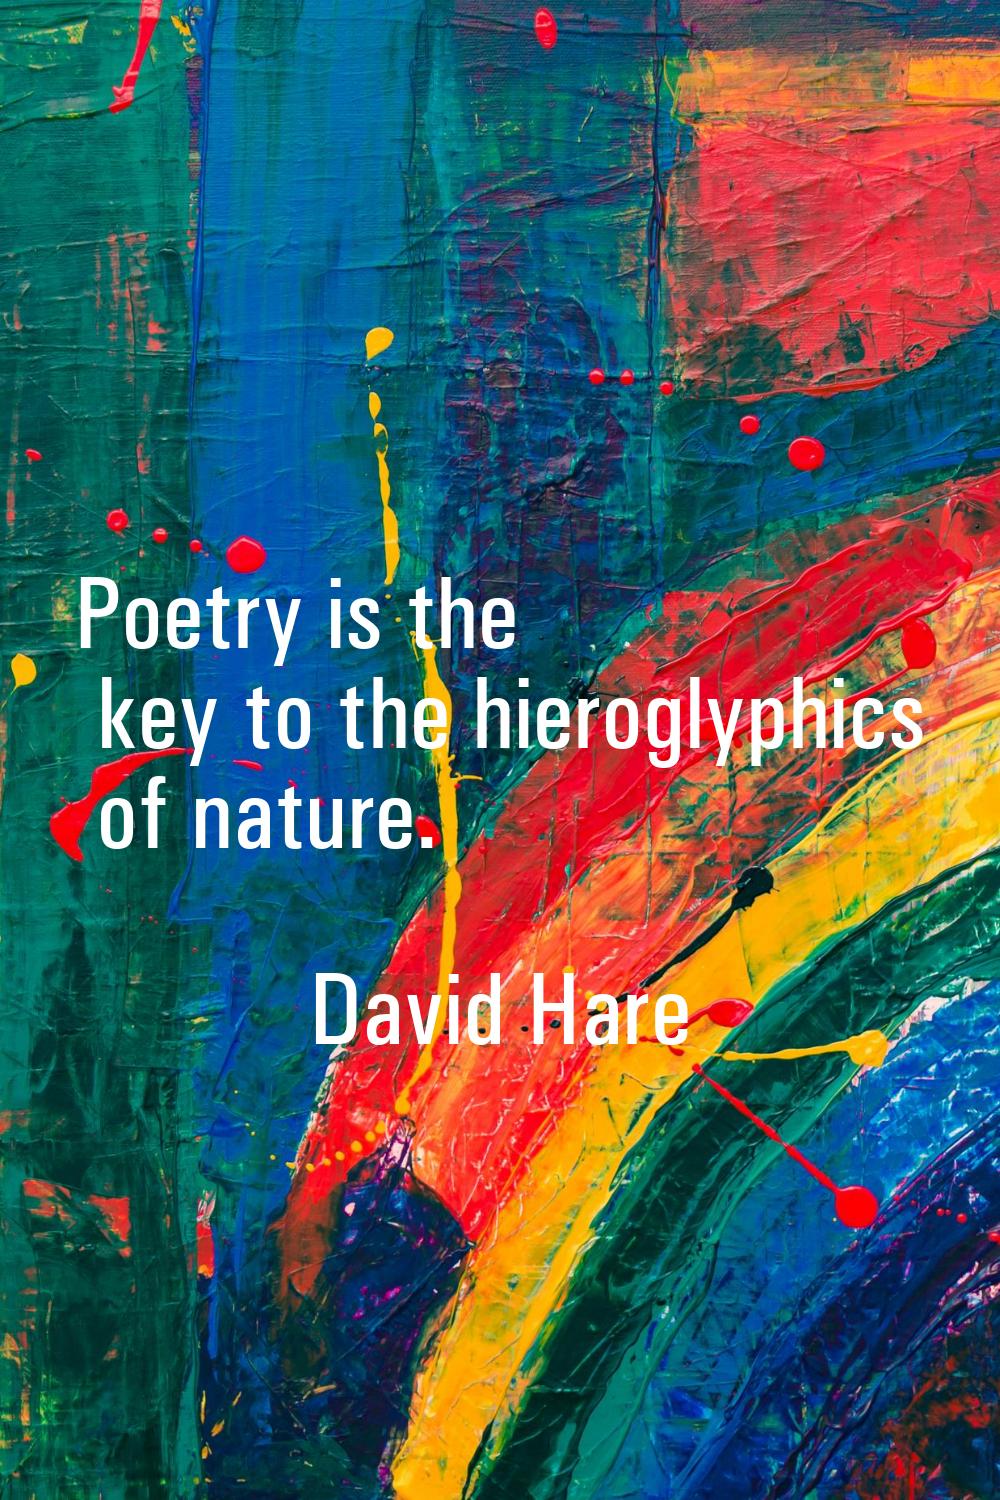 Poetry is the key to the hieroglyphics of nature.